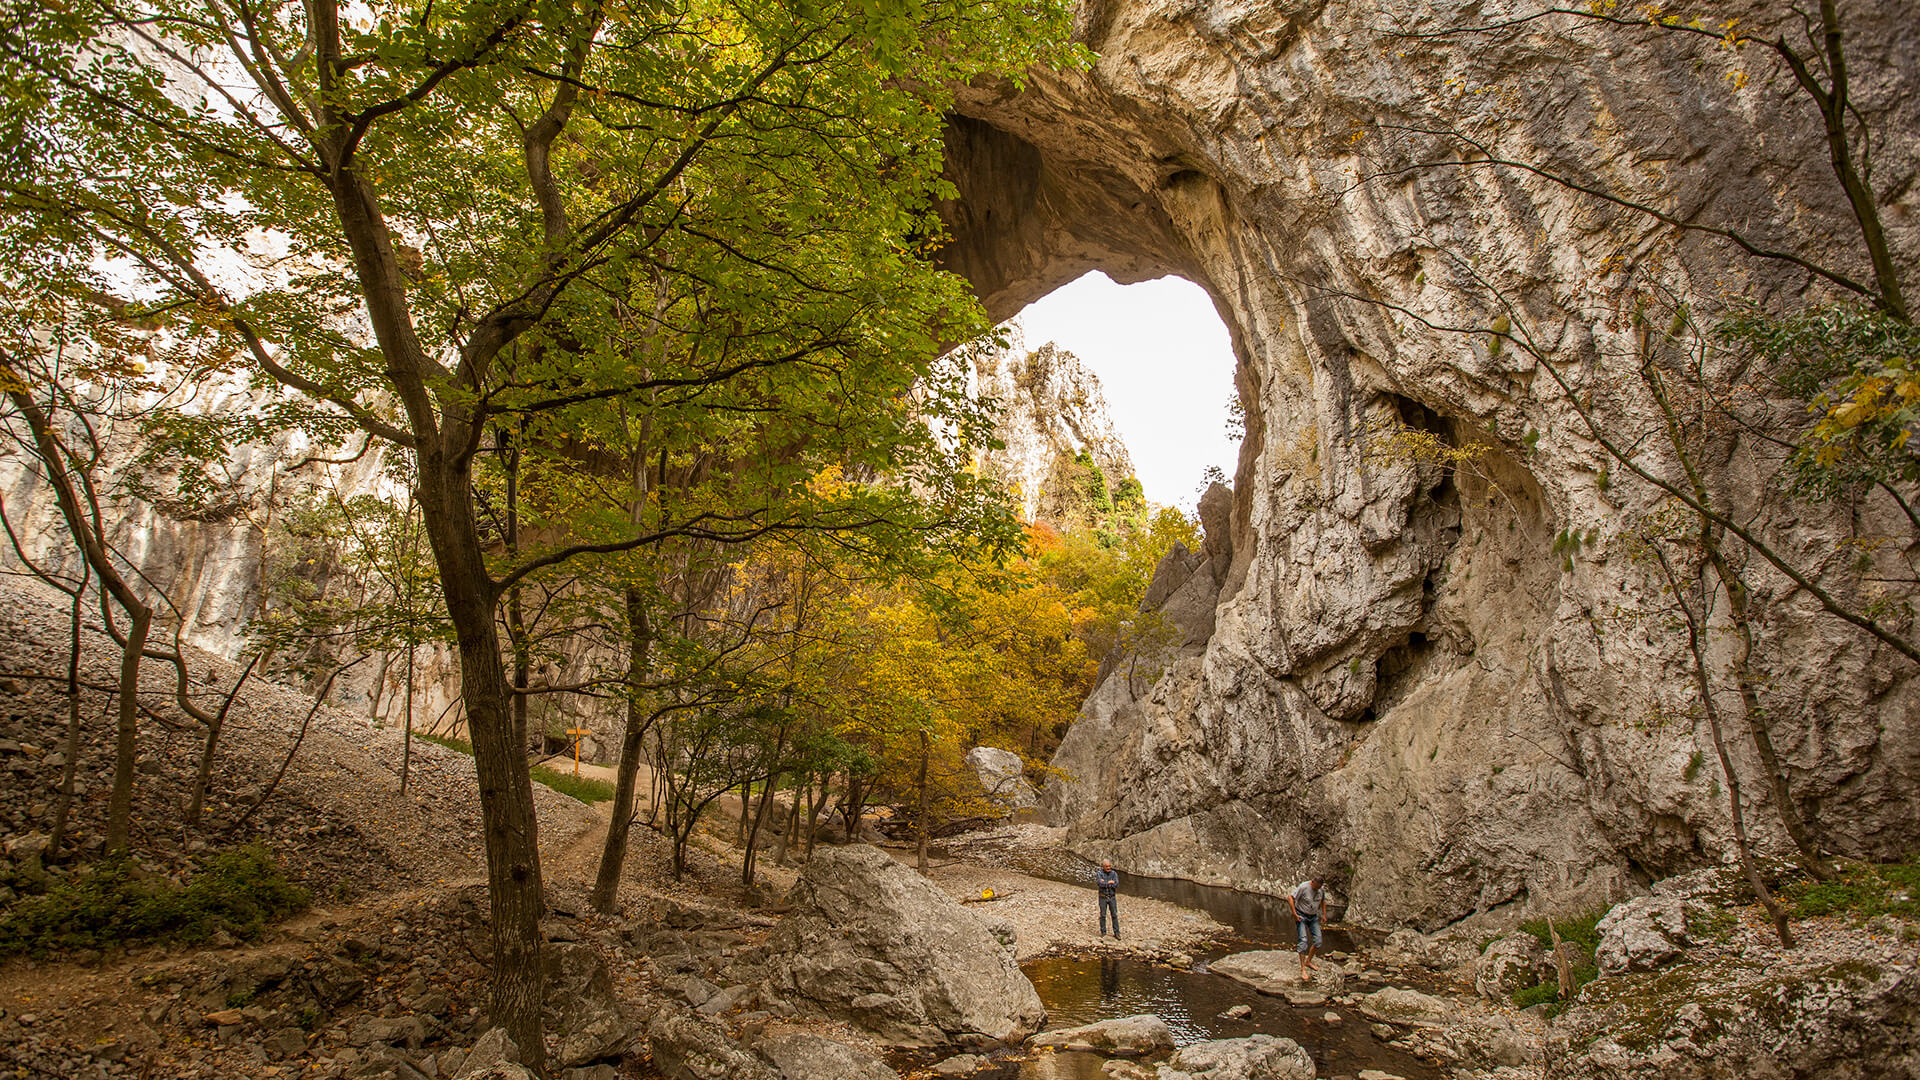 The Republic of Serbia got its first geopark